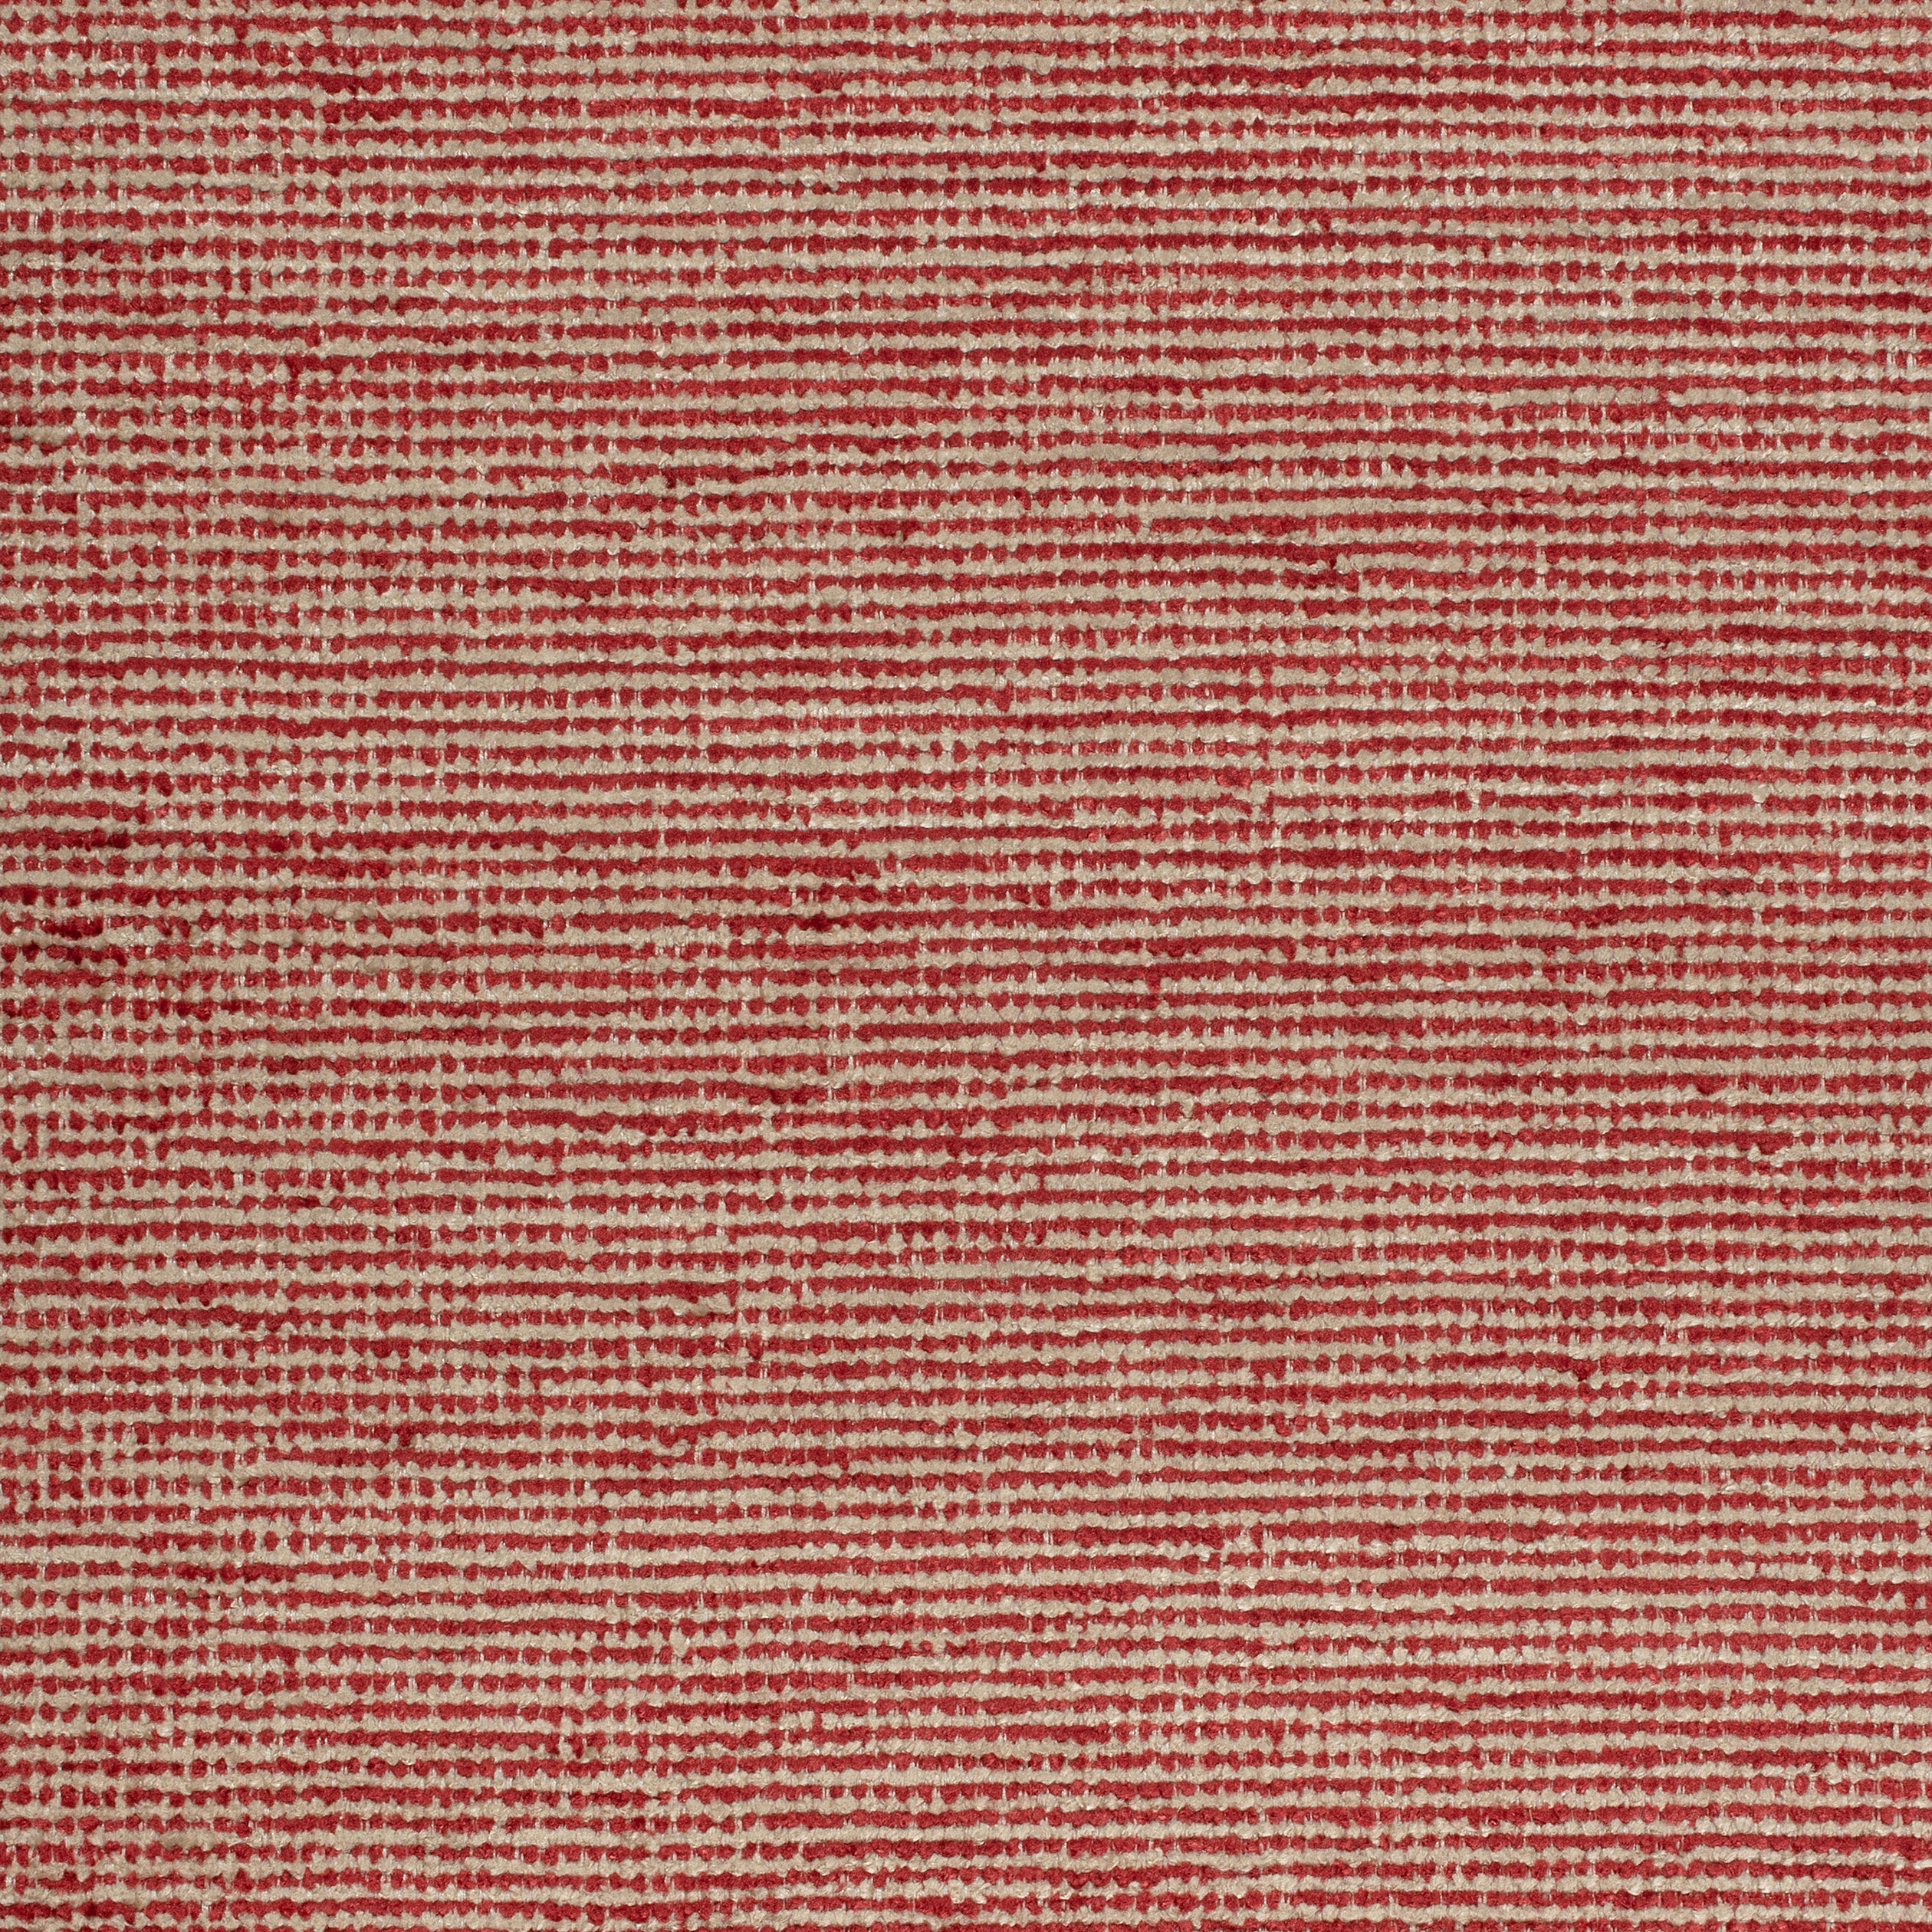 Milo fabric in cardinal color - pattern number W73324 - by Thibaut in the Nomad collection